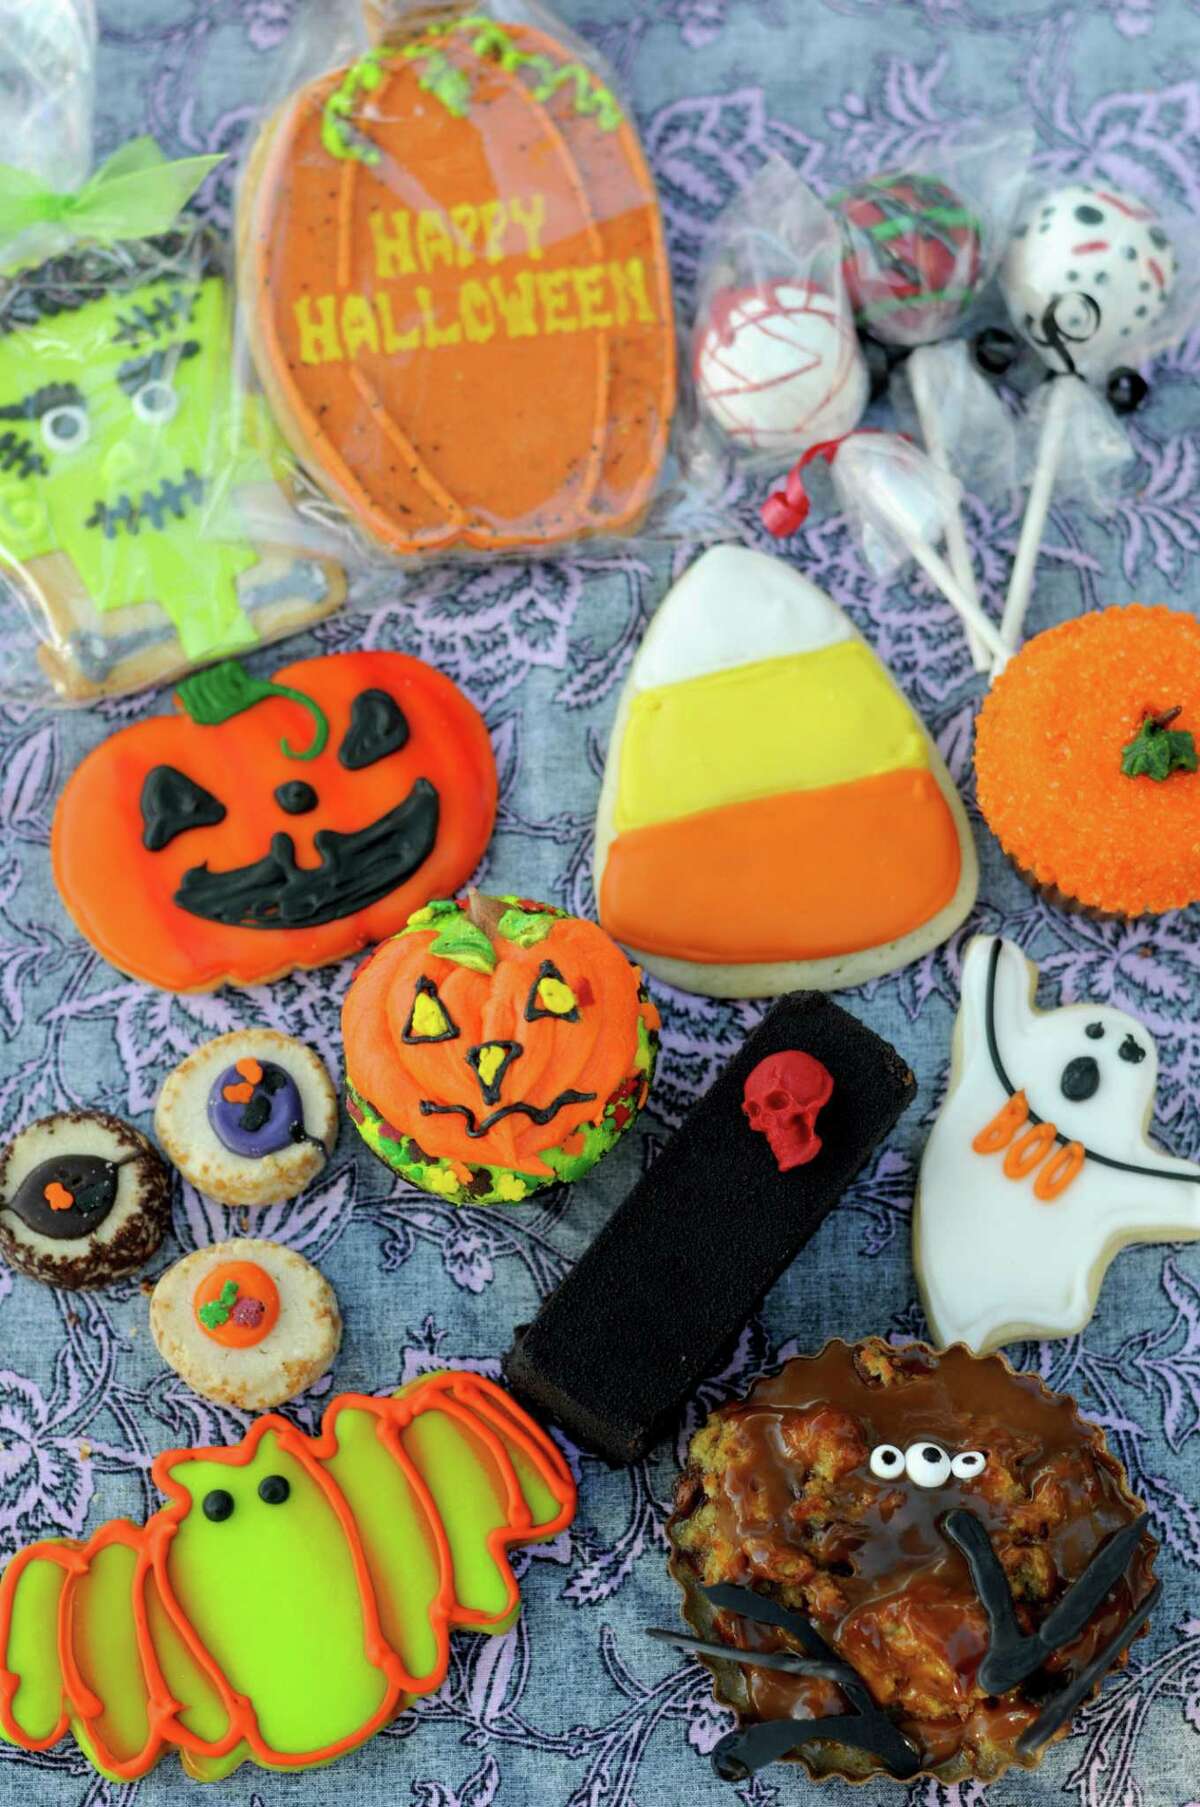 A selection of Halloween-themed treats from San Antonio-area bakeries including (clockwise from top right) Cosmic Cakery, Bird Bakery, Extra Fine and Nadler’s Bakery & Deli